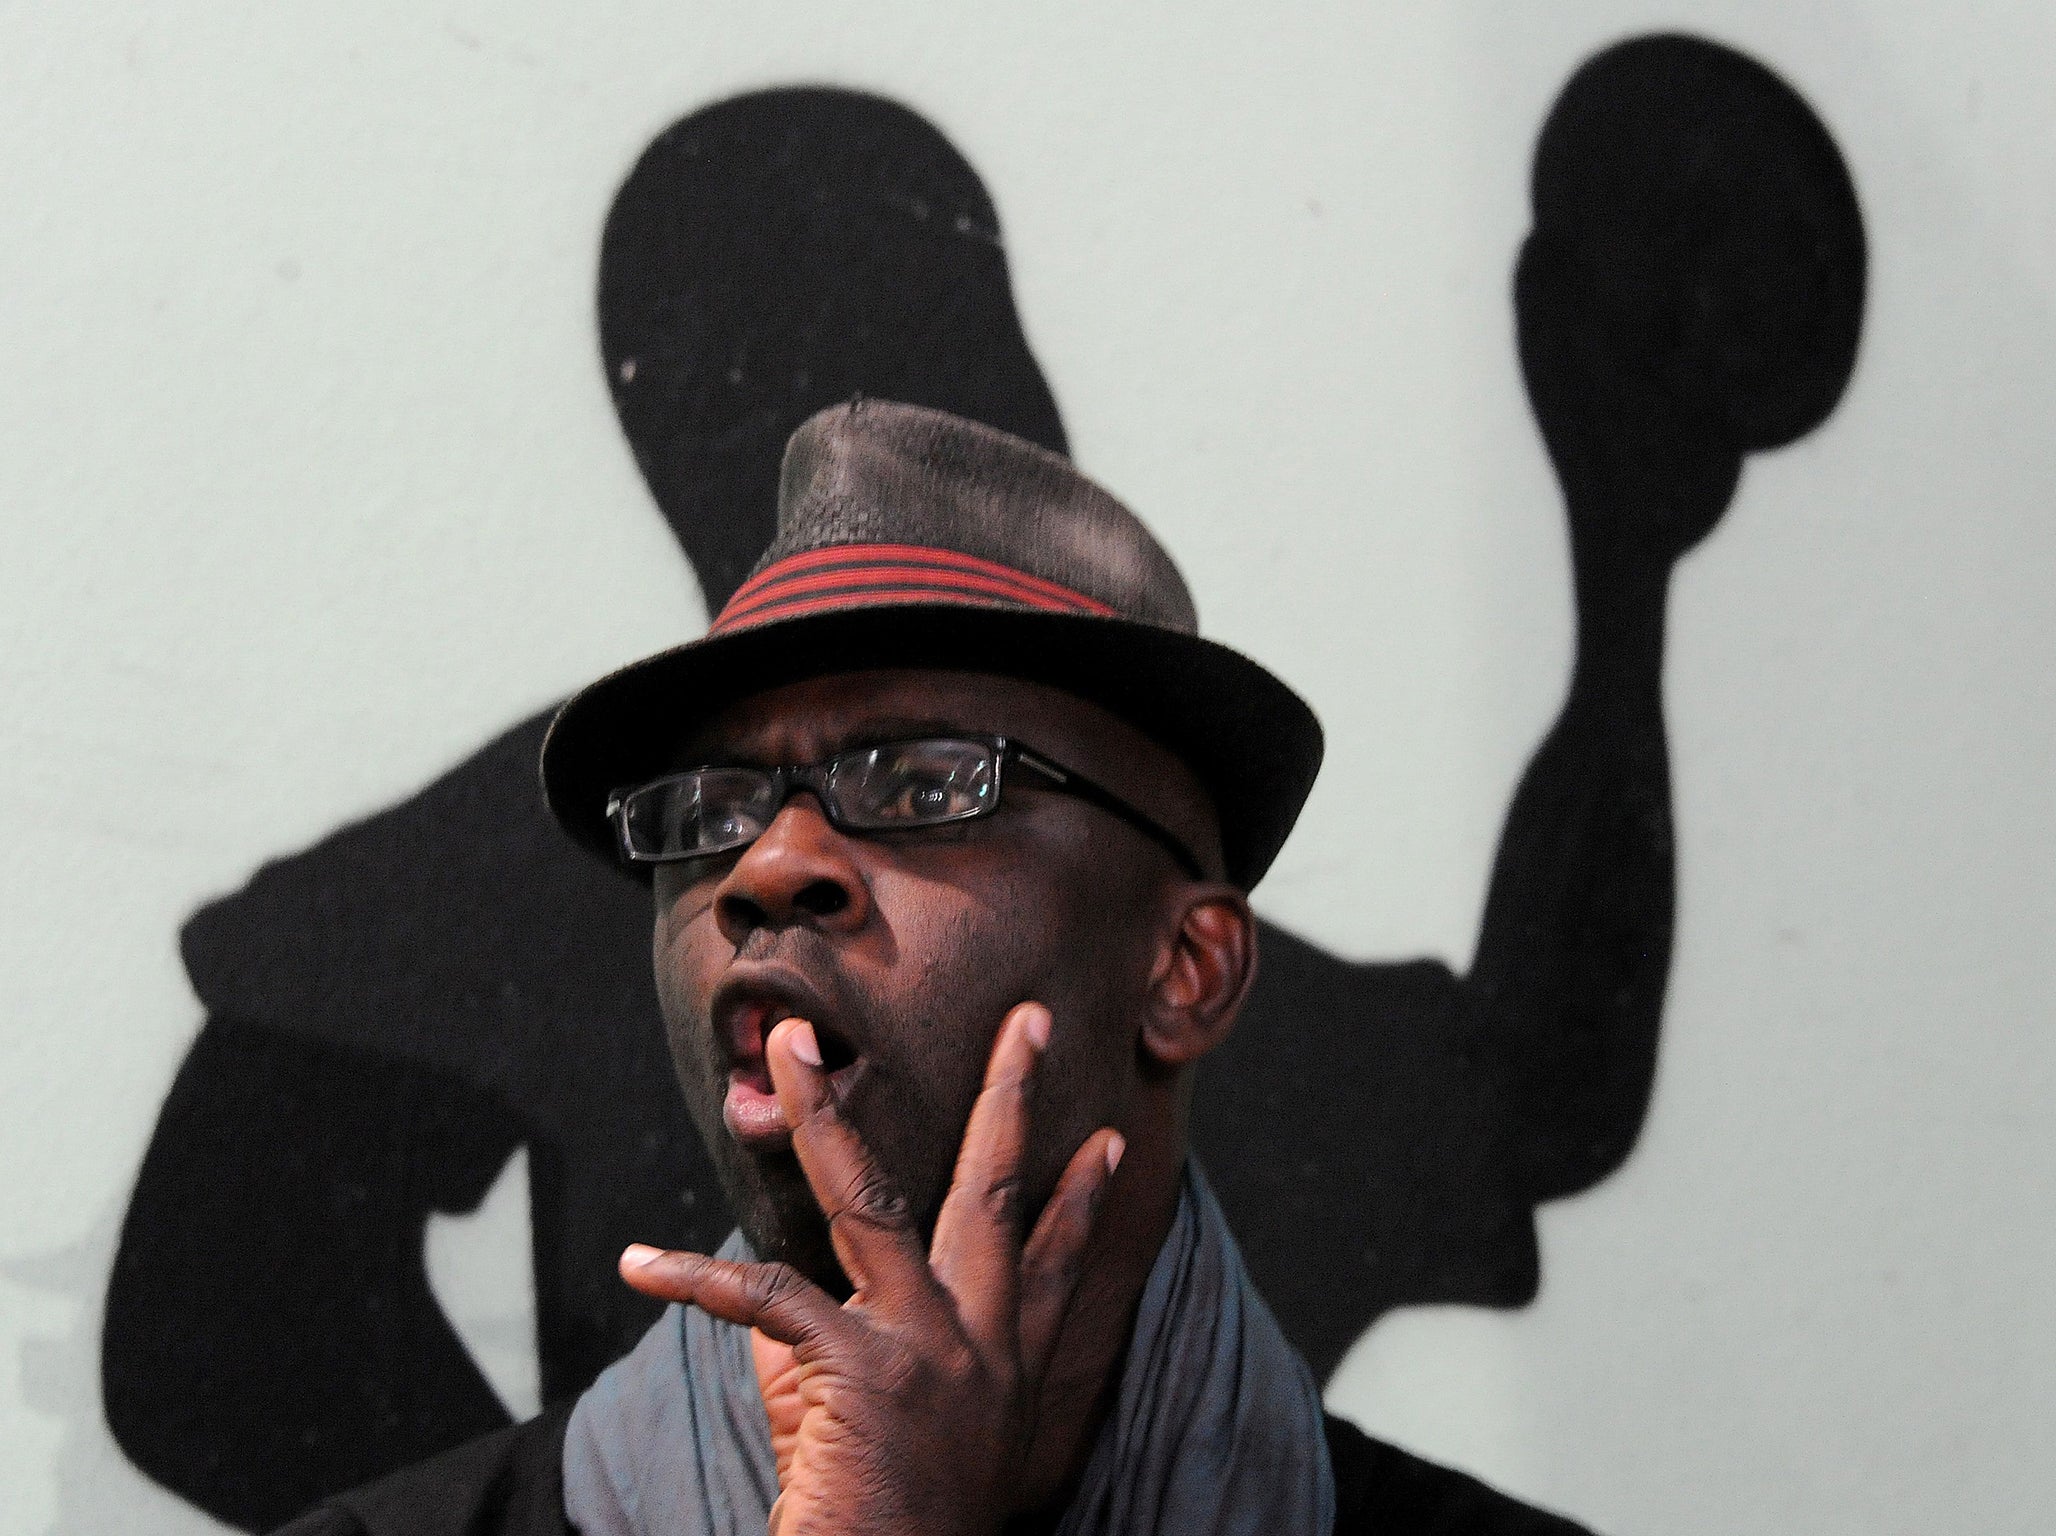 Thuram wants more footballers to take a stand against discrimination